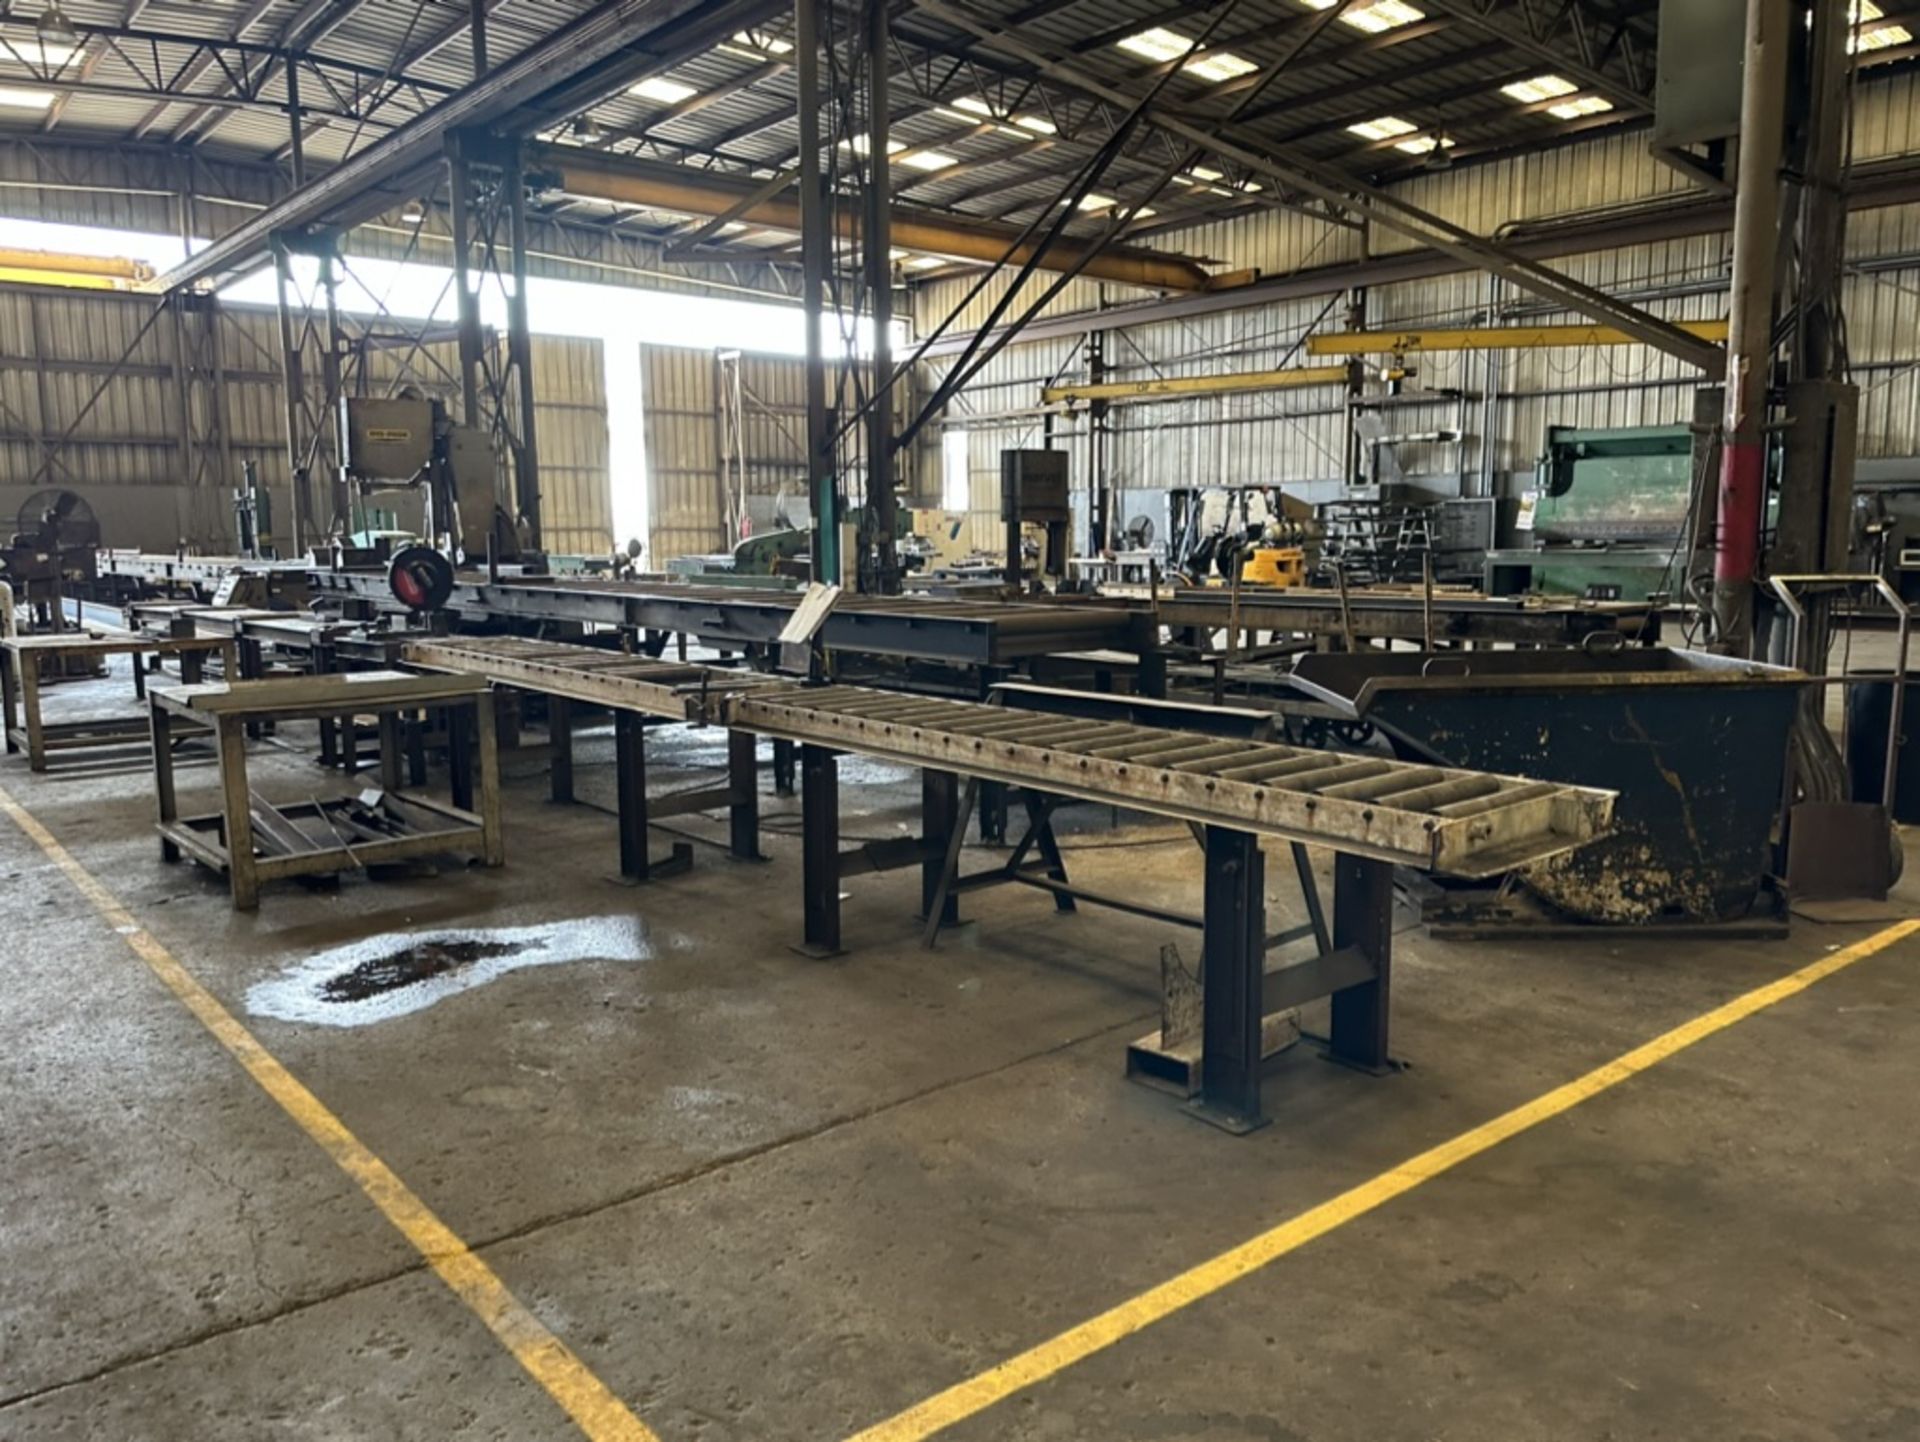 Structural Steel Fabricator Making Room for new equipment and new materials! - Image 26 of 26